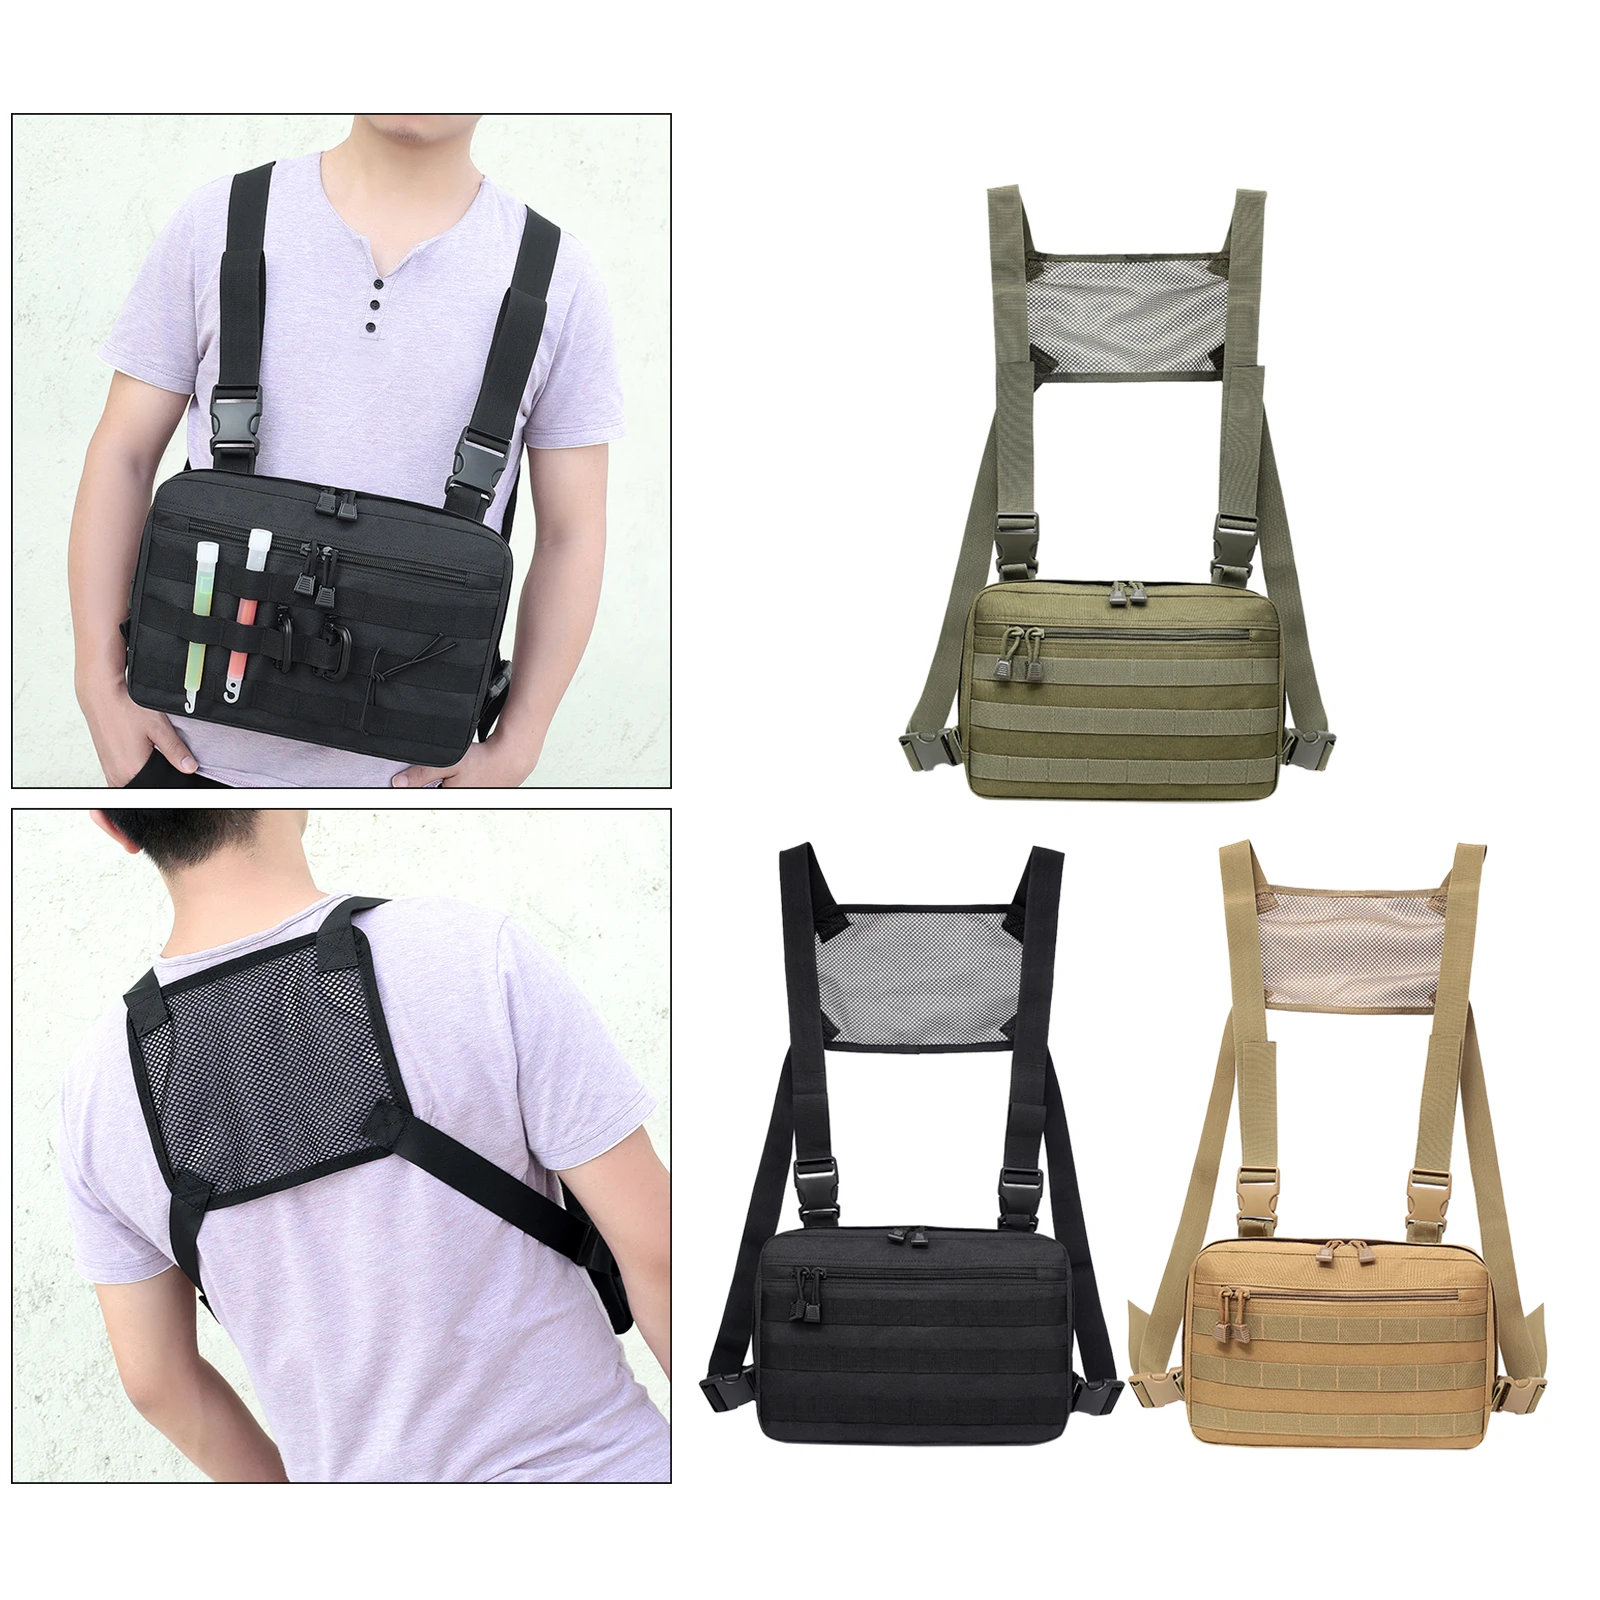 Outdoor Tactical Chest Bag Front Rig Pouch Utility Bag Waist Pack Hunting Hiking Sports Harness Modular Molle Vest for Women Men